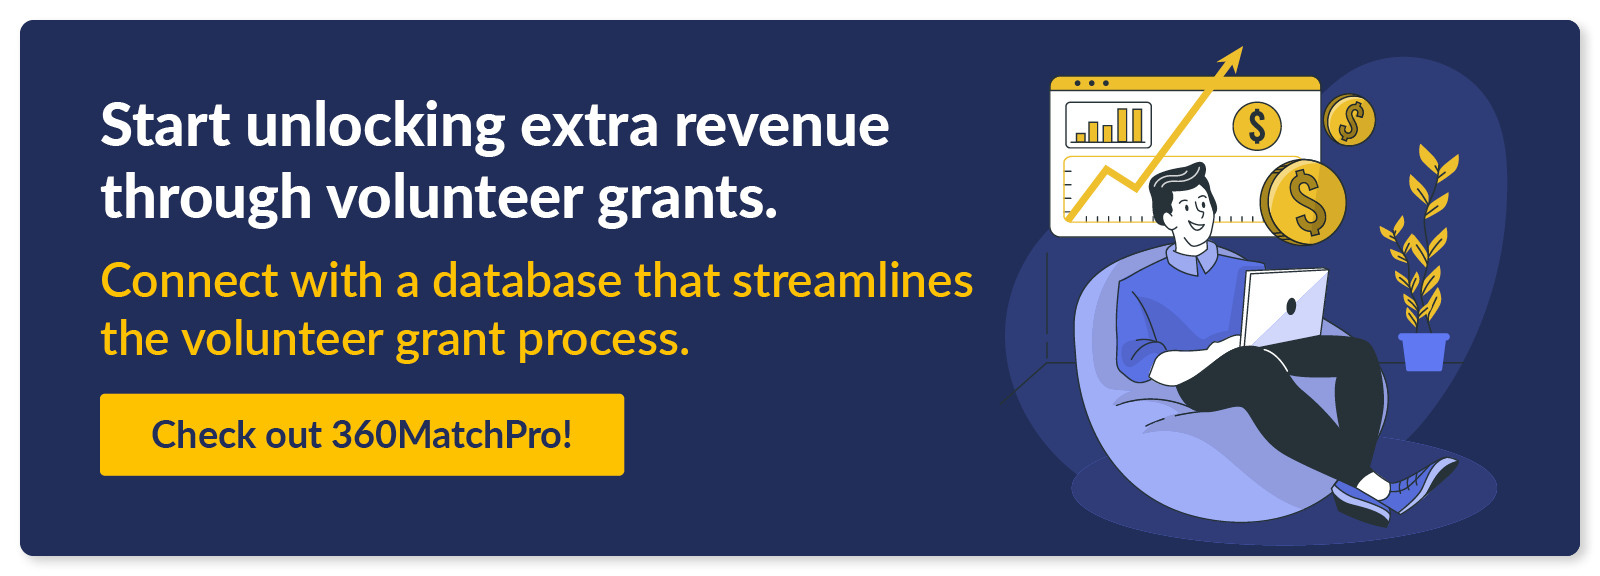 Start unlocking extra revenue through volunteer grants. Connect with a database that streamlines the volunteer grant process. Check out 360MatchPro!